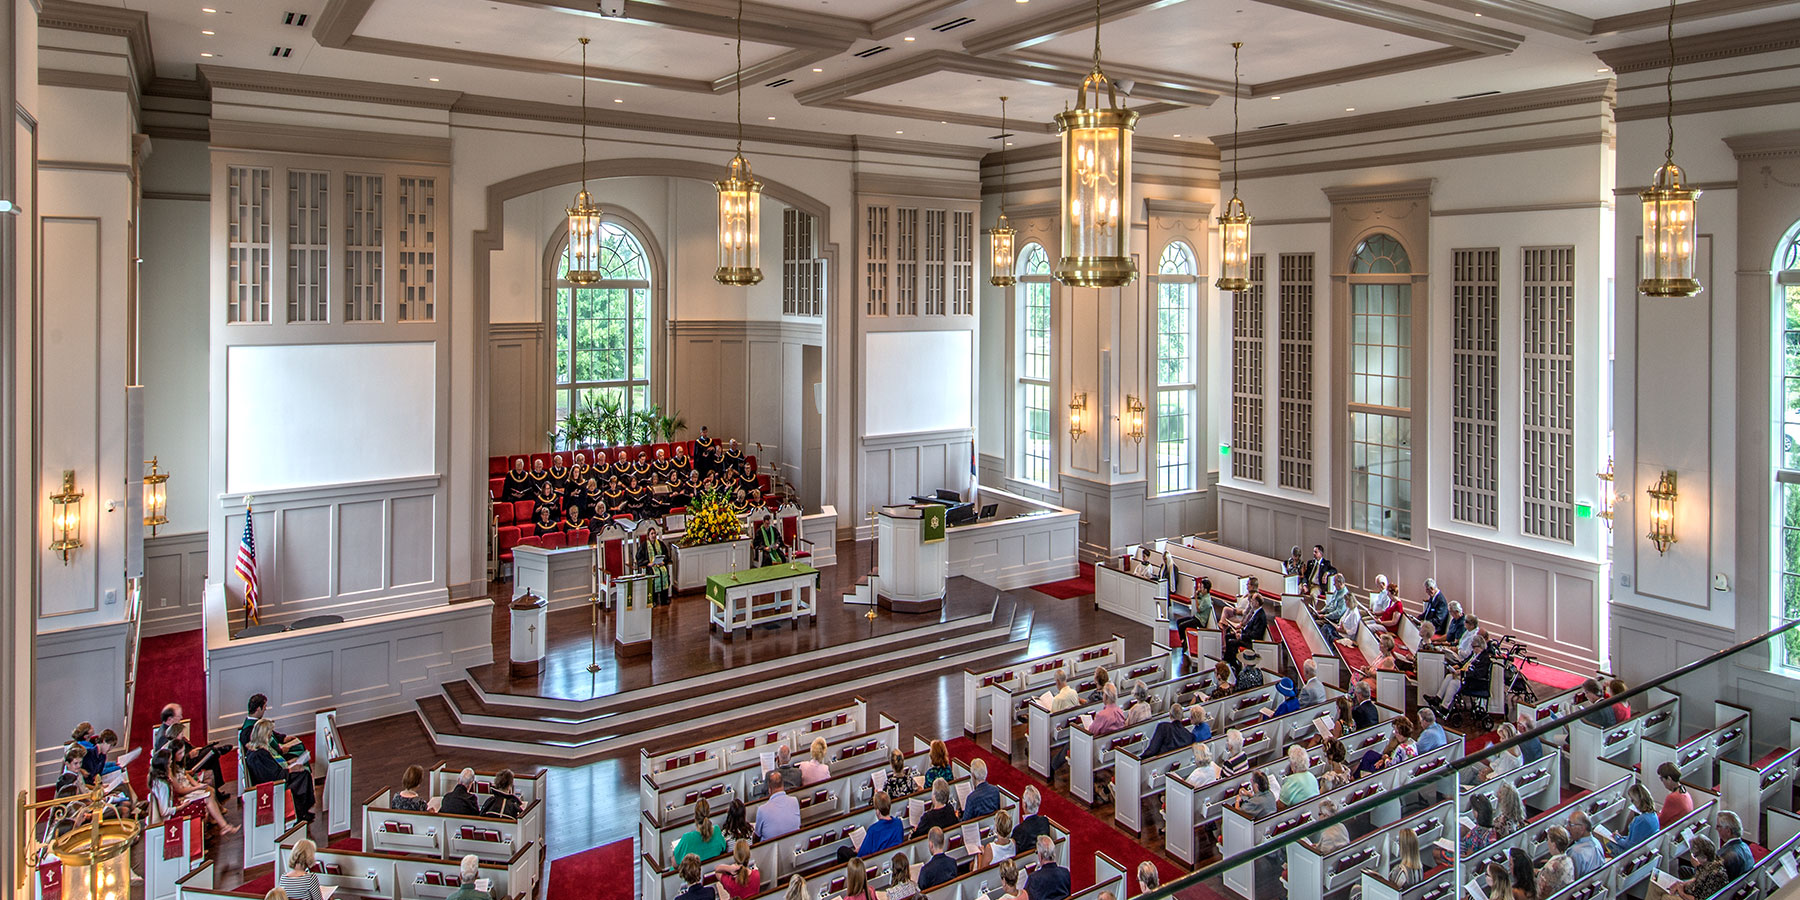 BOUDREAUX worked with First Presbyterian Church in Myrtle Beach to provide a design for the interior and exterior of this church.